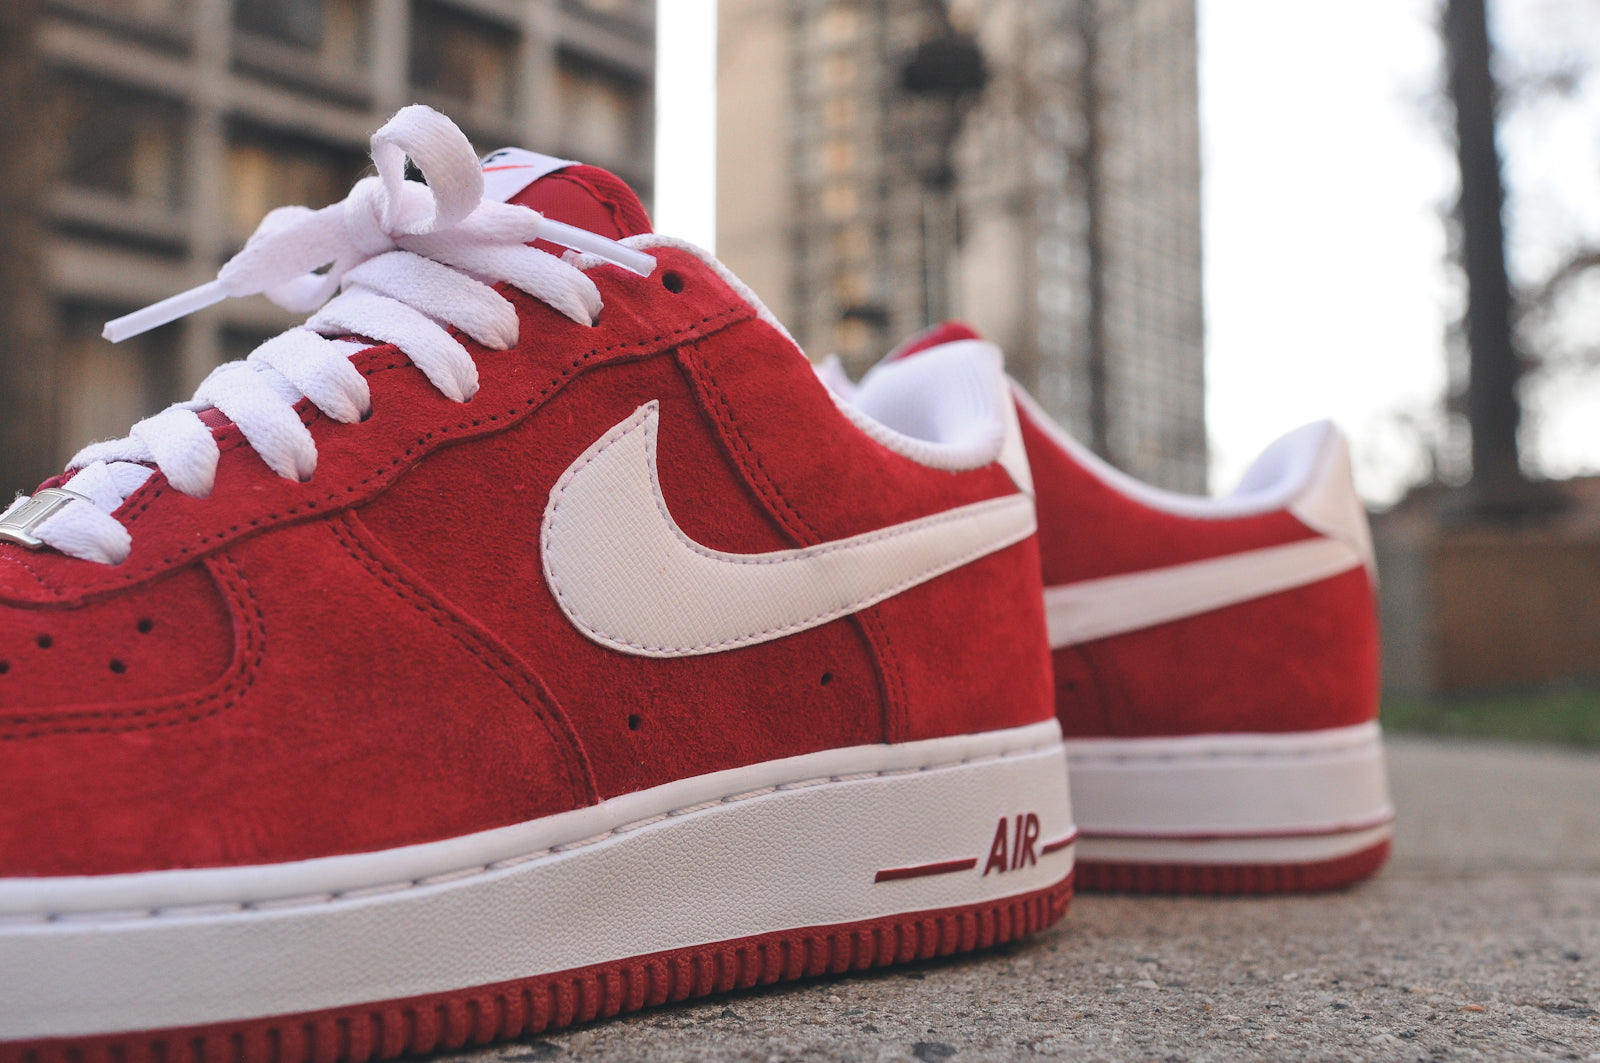 NIKE AIR FORCE 1 LOW - GYM RED / WHITE @ KITH NYC – Kith